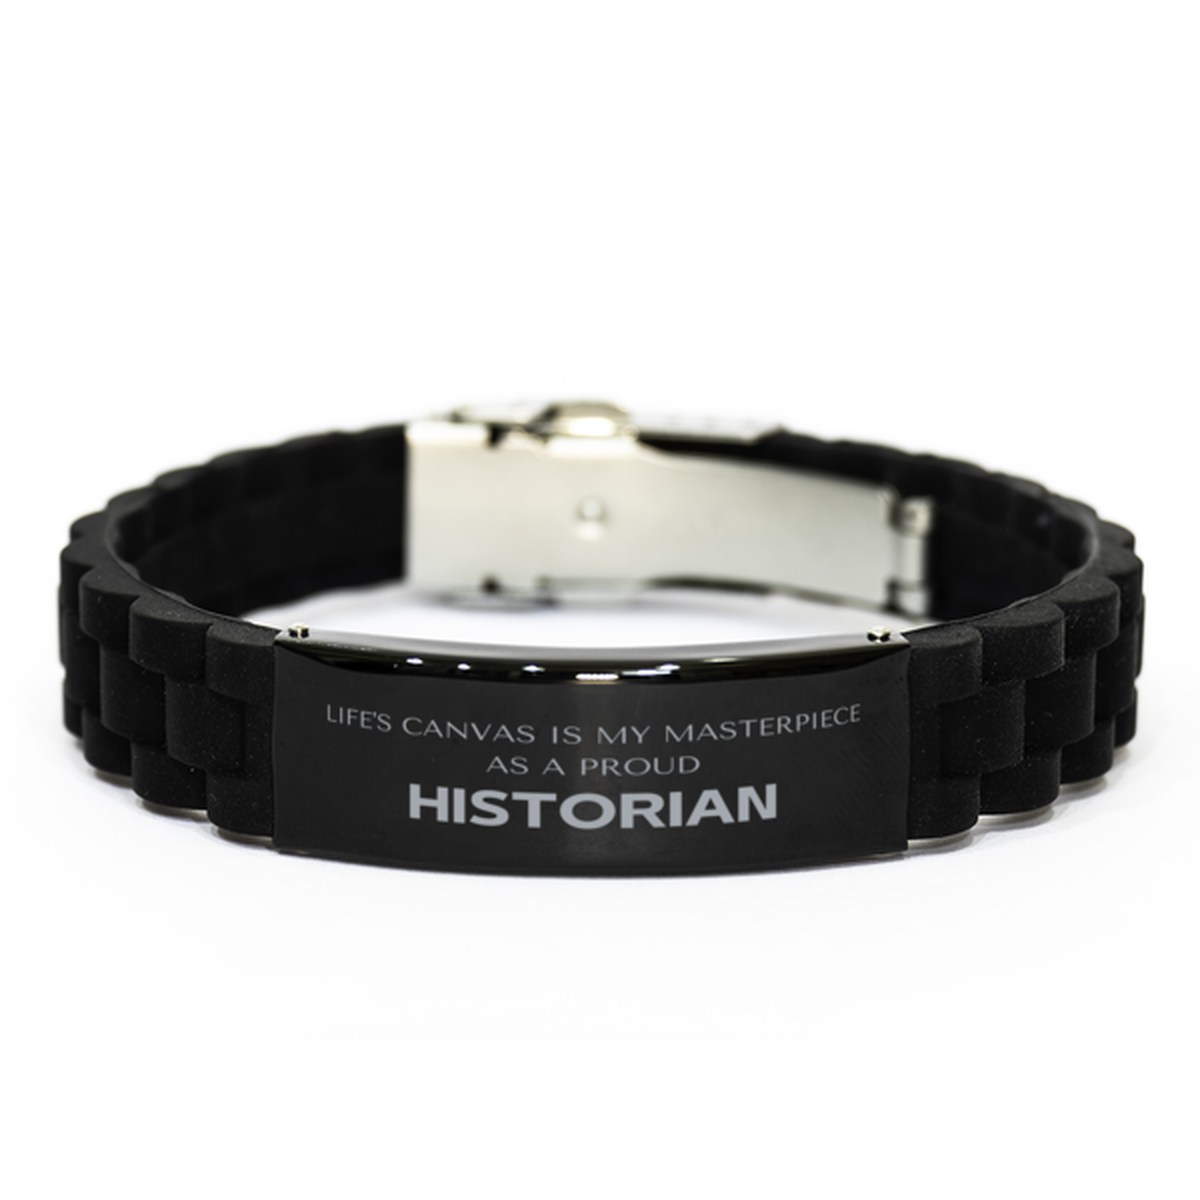 Proud Historian Gifts, Life's canvas is my masterpiece, Epic Birthday Christmas Unique Black Glidelock Clasp Bracelet For Historian, Coworkers, Men, Women, Friends